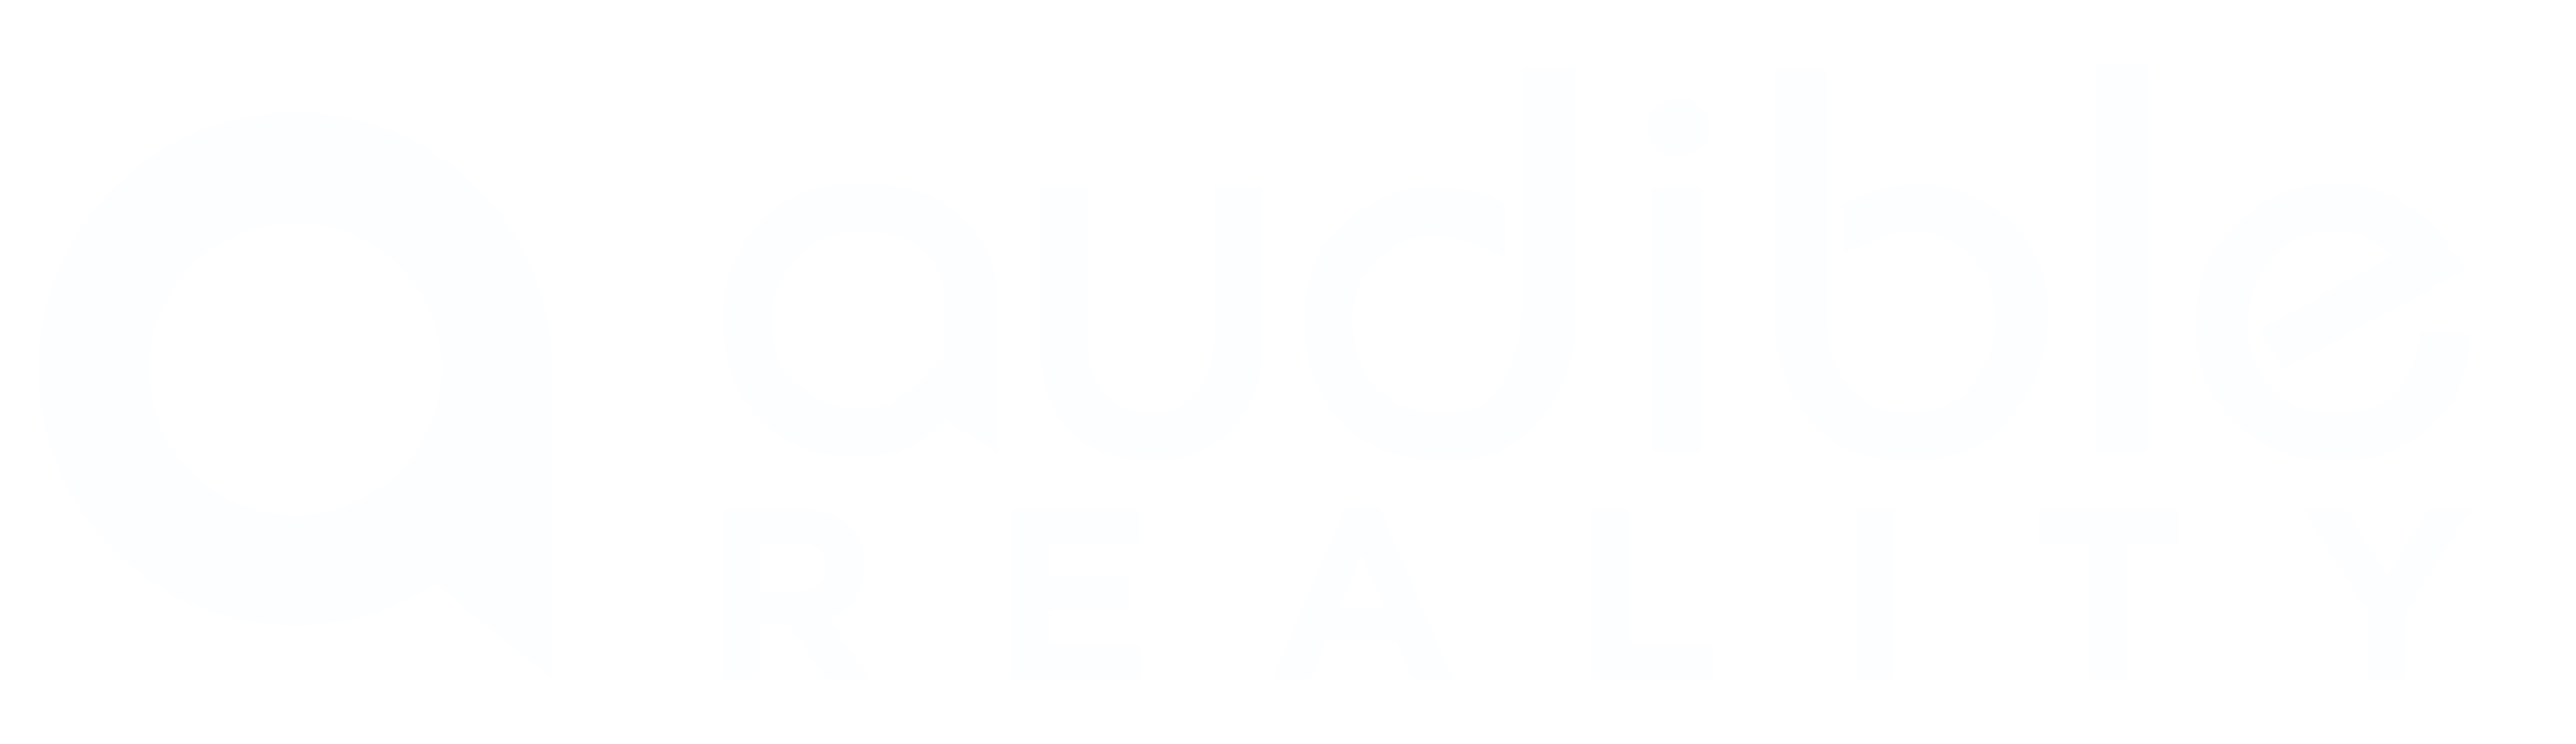 Audible Reality Inc official logo